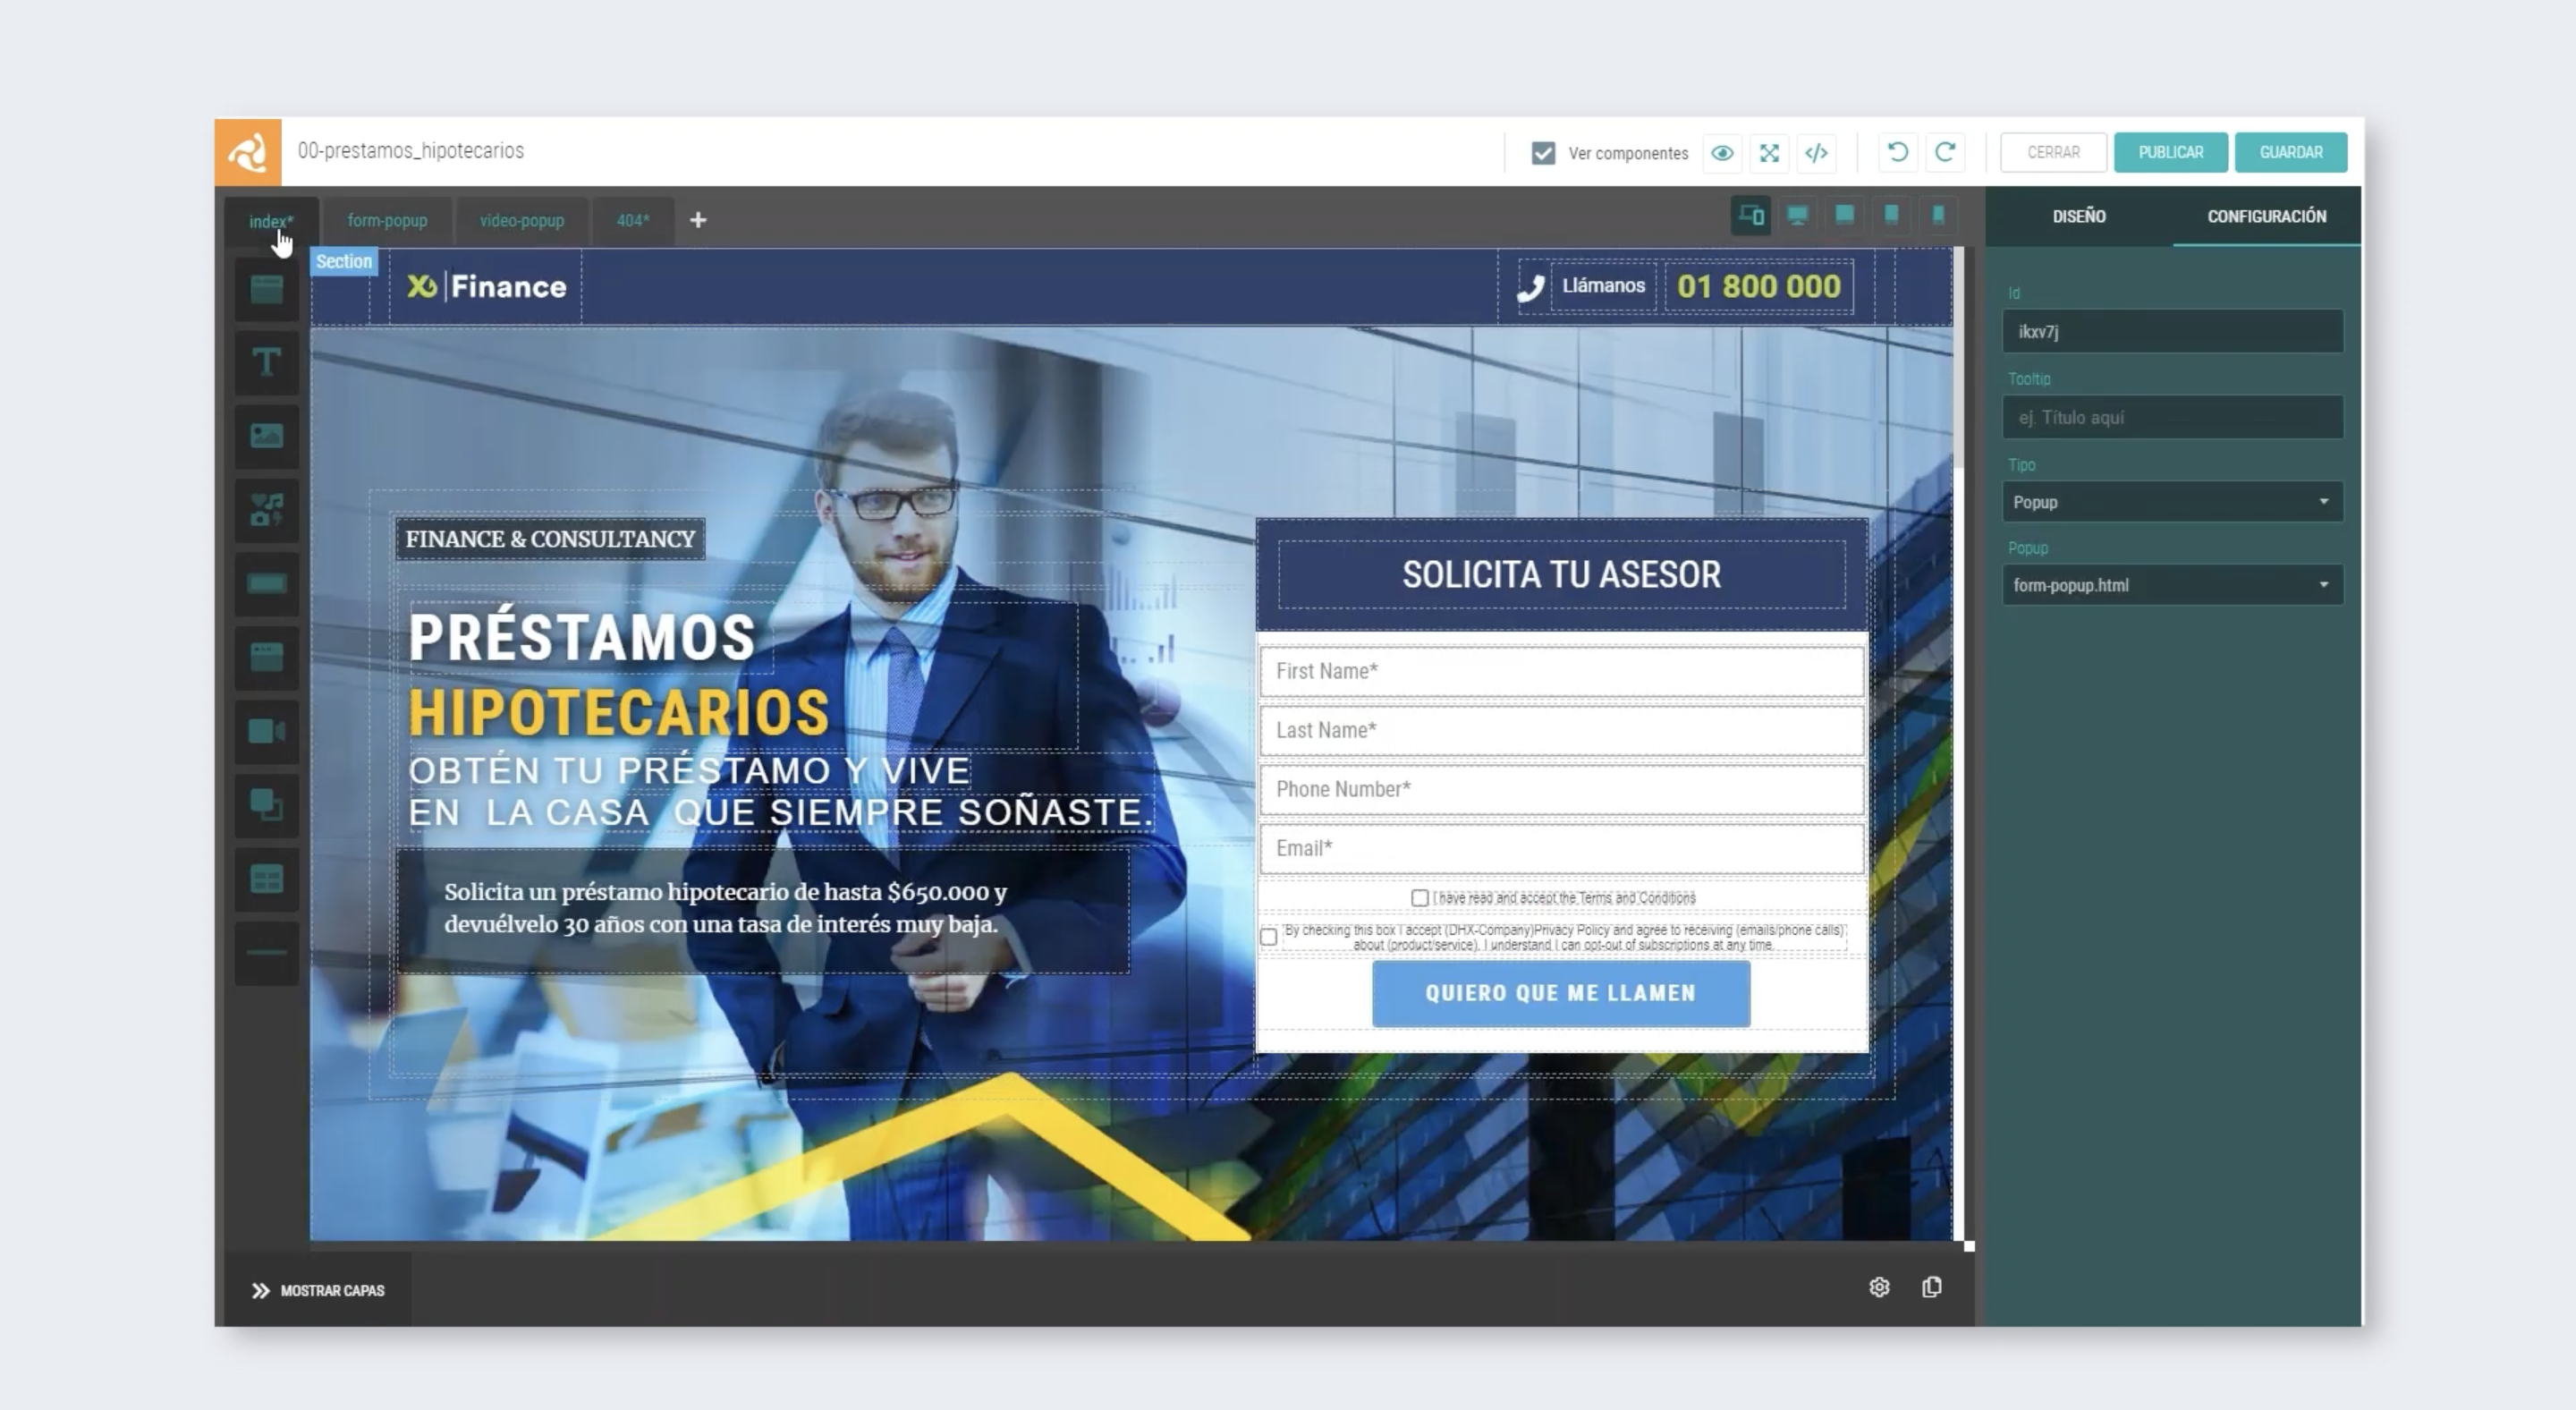 InConcert Marketing Automation & CRM Software - Landing page builder. Design, publish and optimize landing pages, thank you pages, pop-ups and microsites with a powerful Drag & Drop designer that allows you to run campaigns without relying on designers or developers.